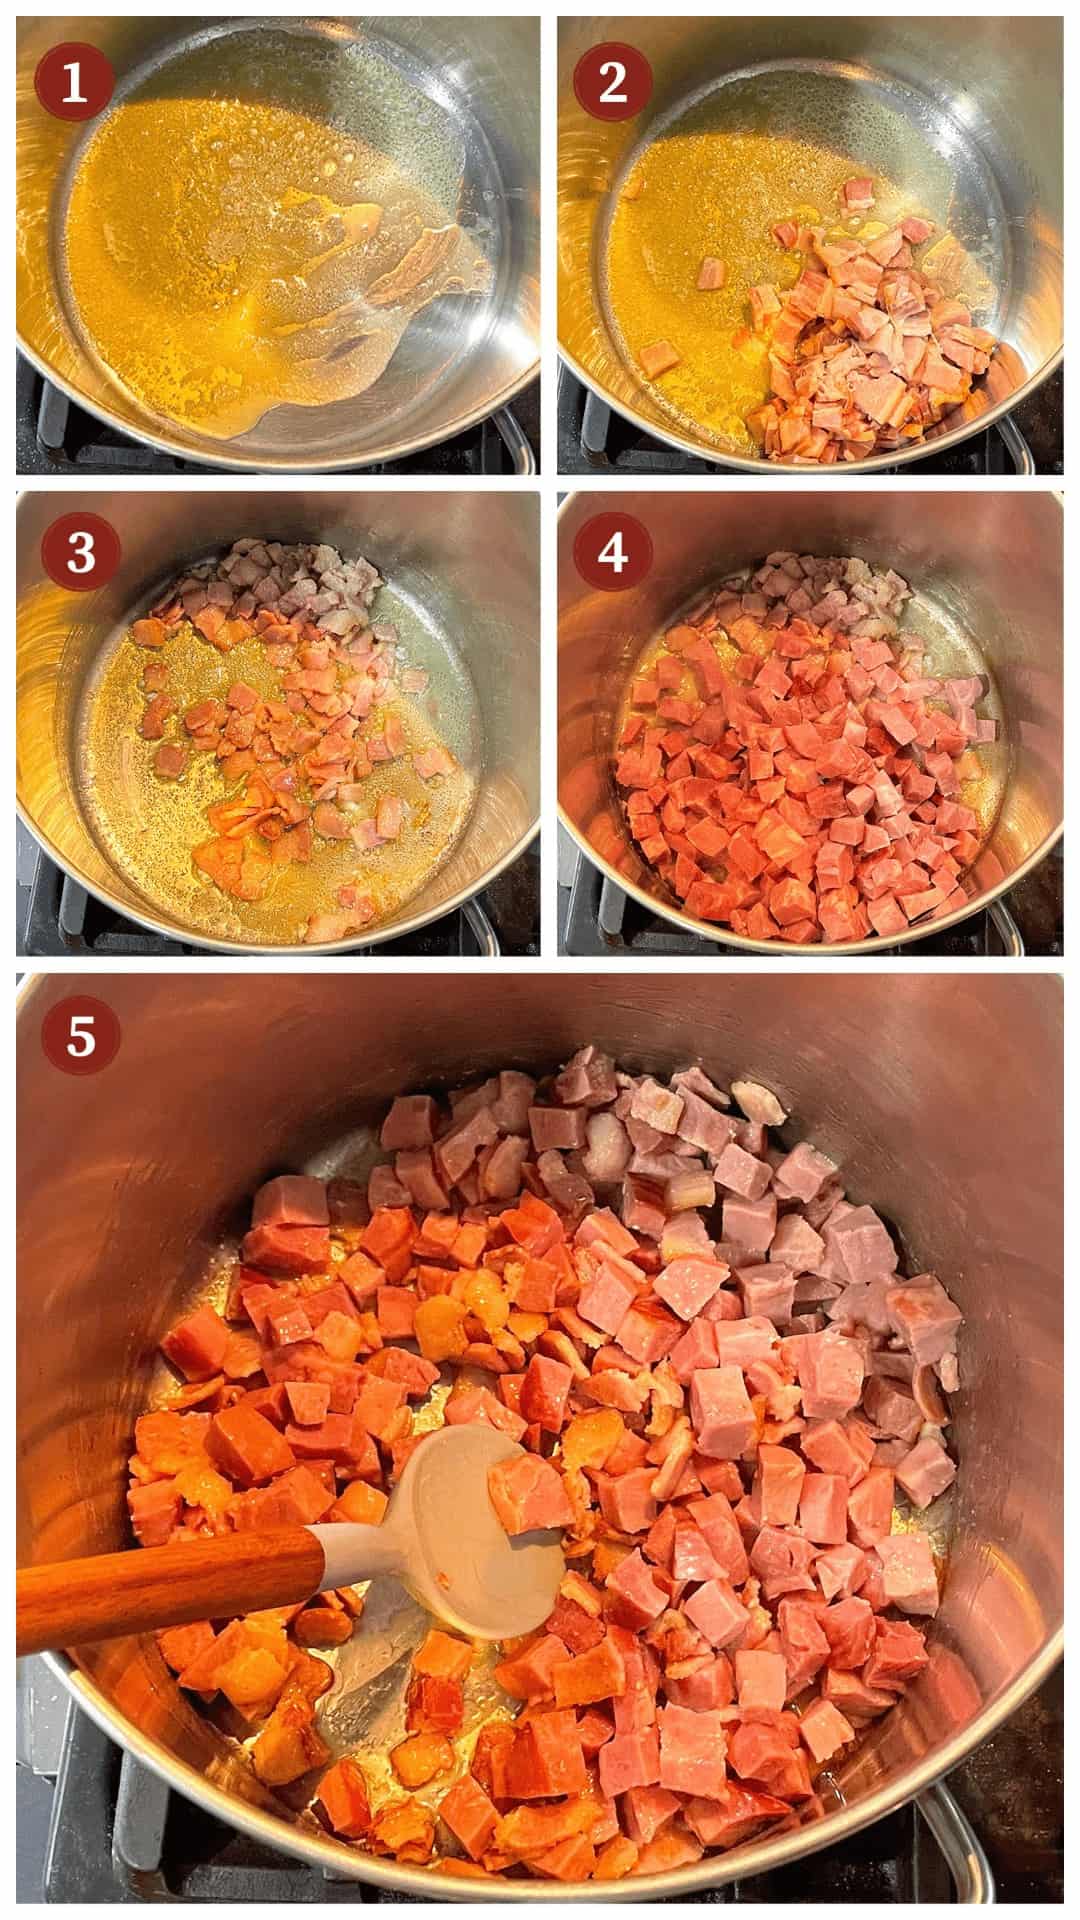 A collage of images showing how to make red beans and rice, steps 1-5.